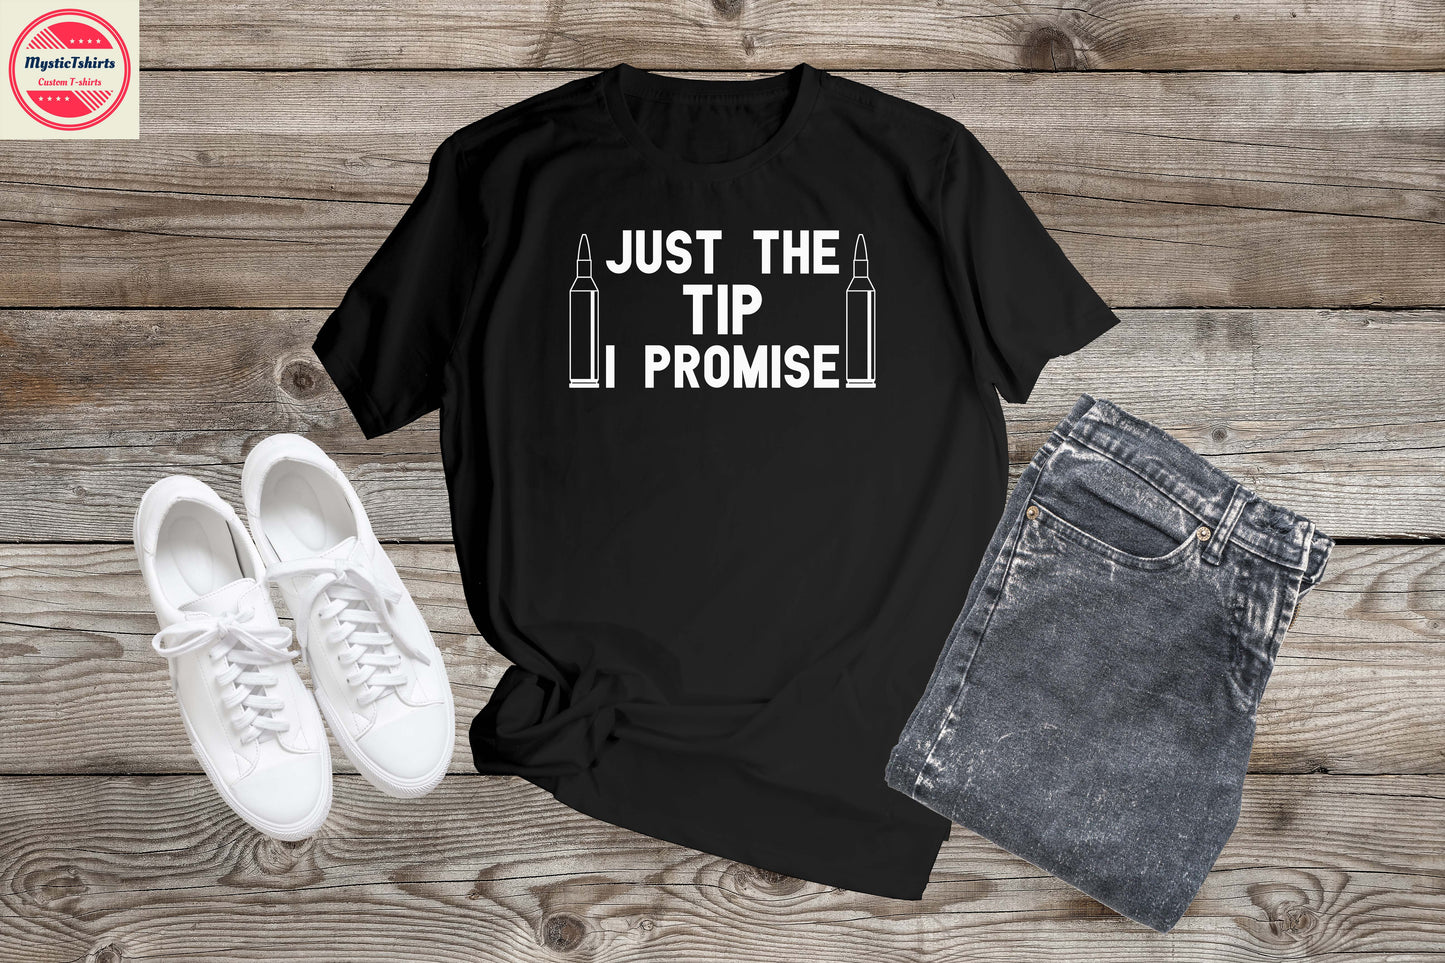 262. JUST THE TIP I PROMISE, Personalized T-Shirt, Custom Text, Make Your Own Shirt, Custom Tee